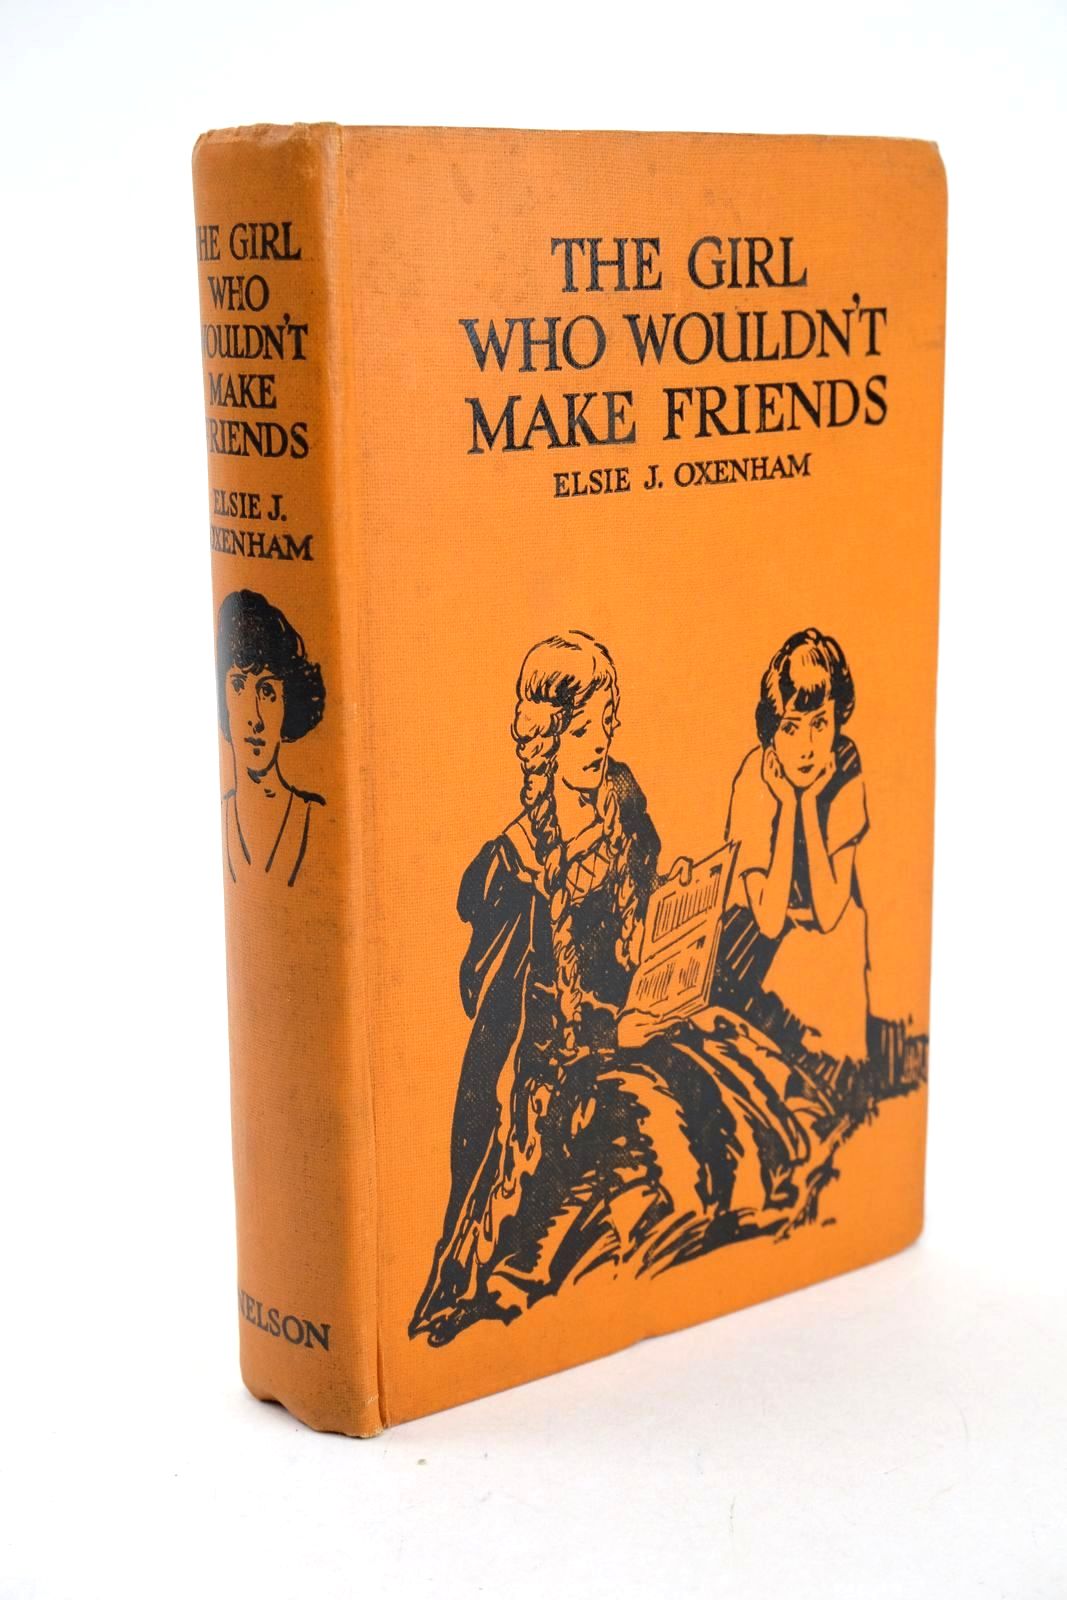 Photo of THE GIRL WHO WOULDN'T MAKE FRIENDS written by Oxenham, Elsie J. illustrated by Hickling, P.B. published by Thomas Nelson and Sons Ltd. (STOCK CODE: 1326860)  for sale by Stella & Rose's Books